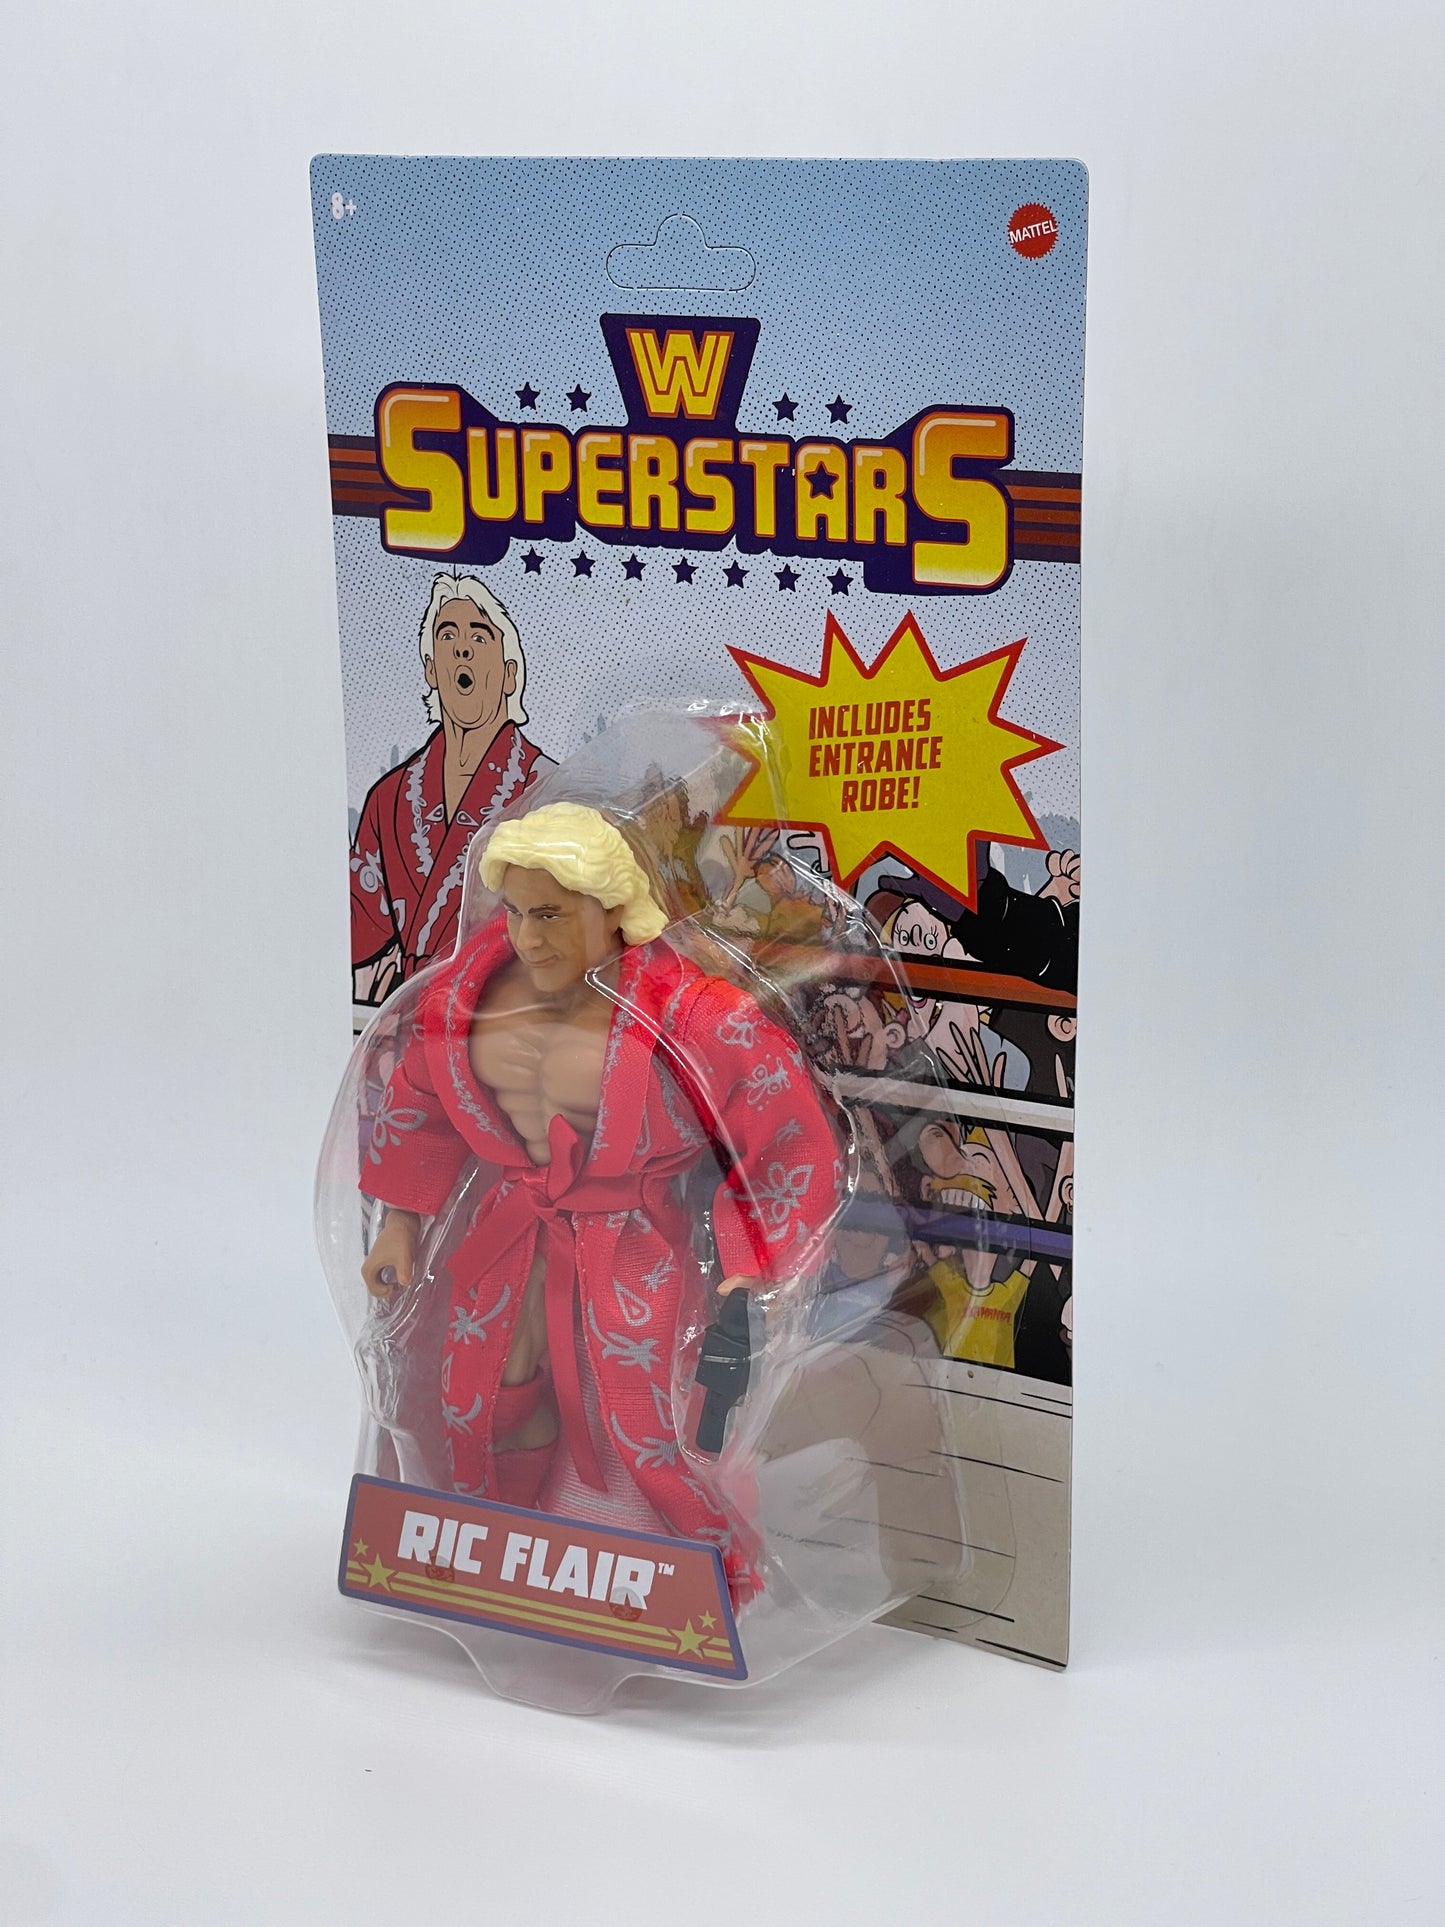 WWE Wrestling W Superstars "Ric Flair" Series 1 Mattel unpunched (2021) US